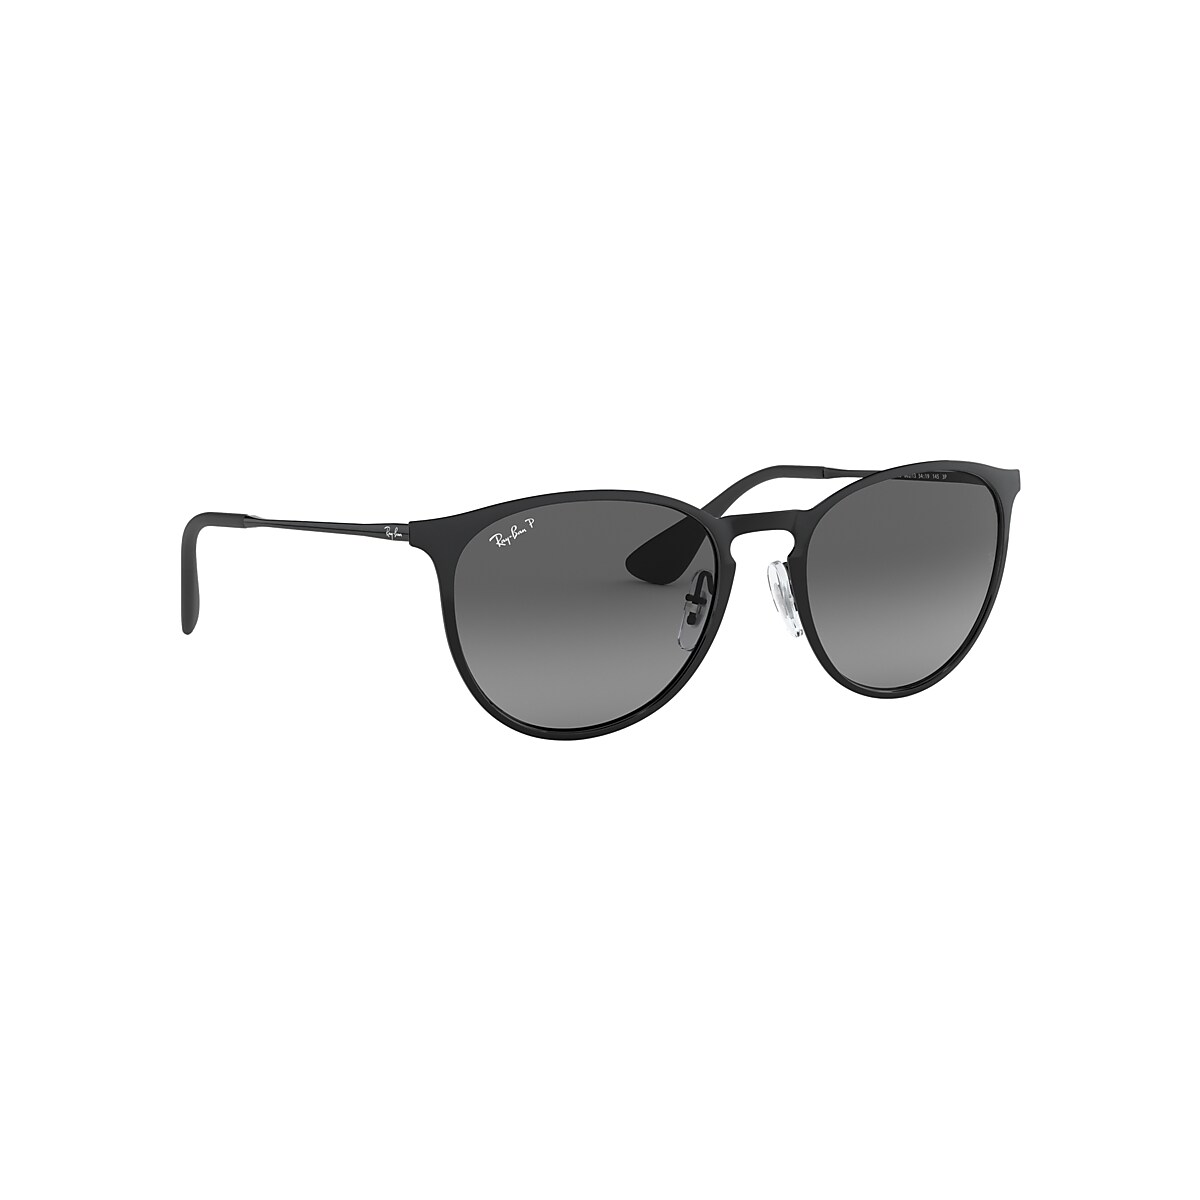 ERIKA METAL Sunglasses in Black and Grey - RB3539 | Ray-Ban 